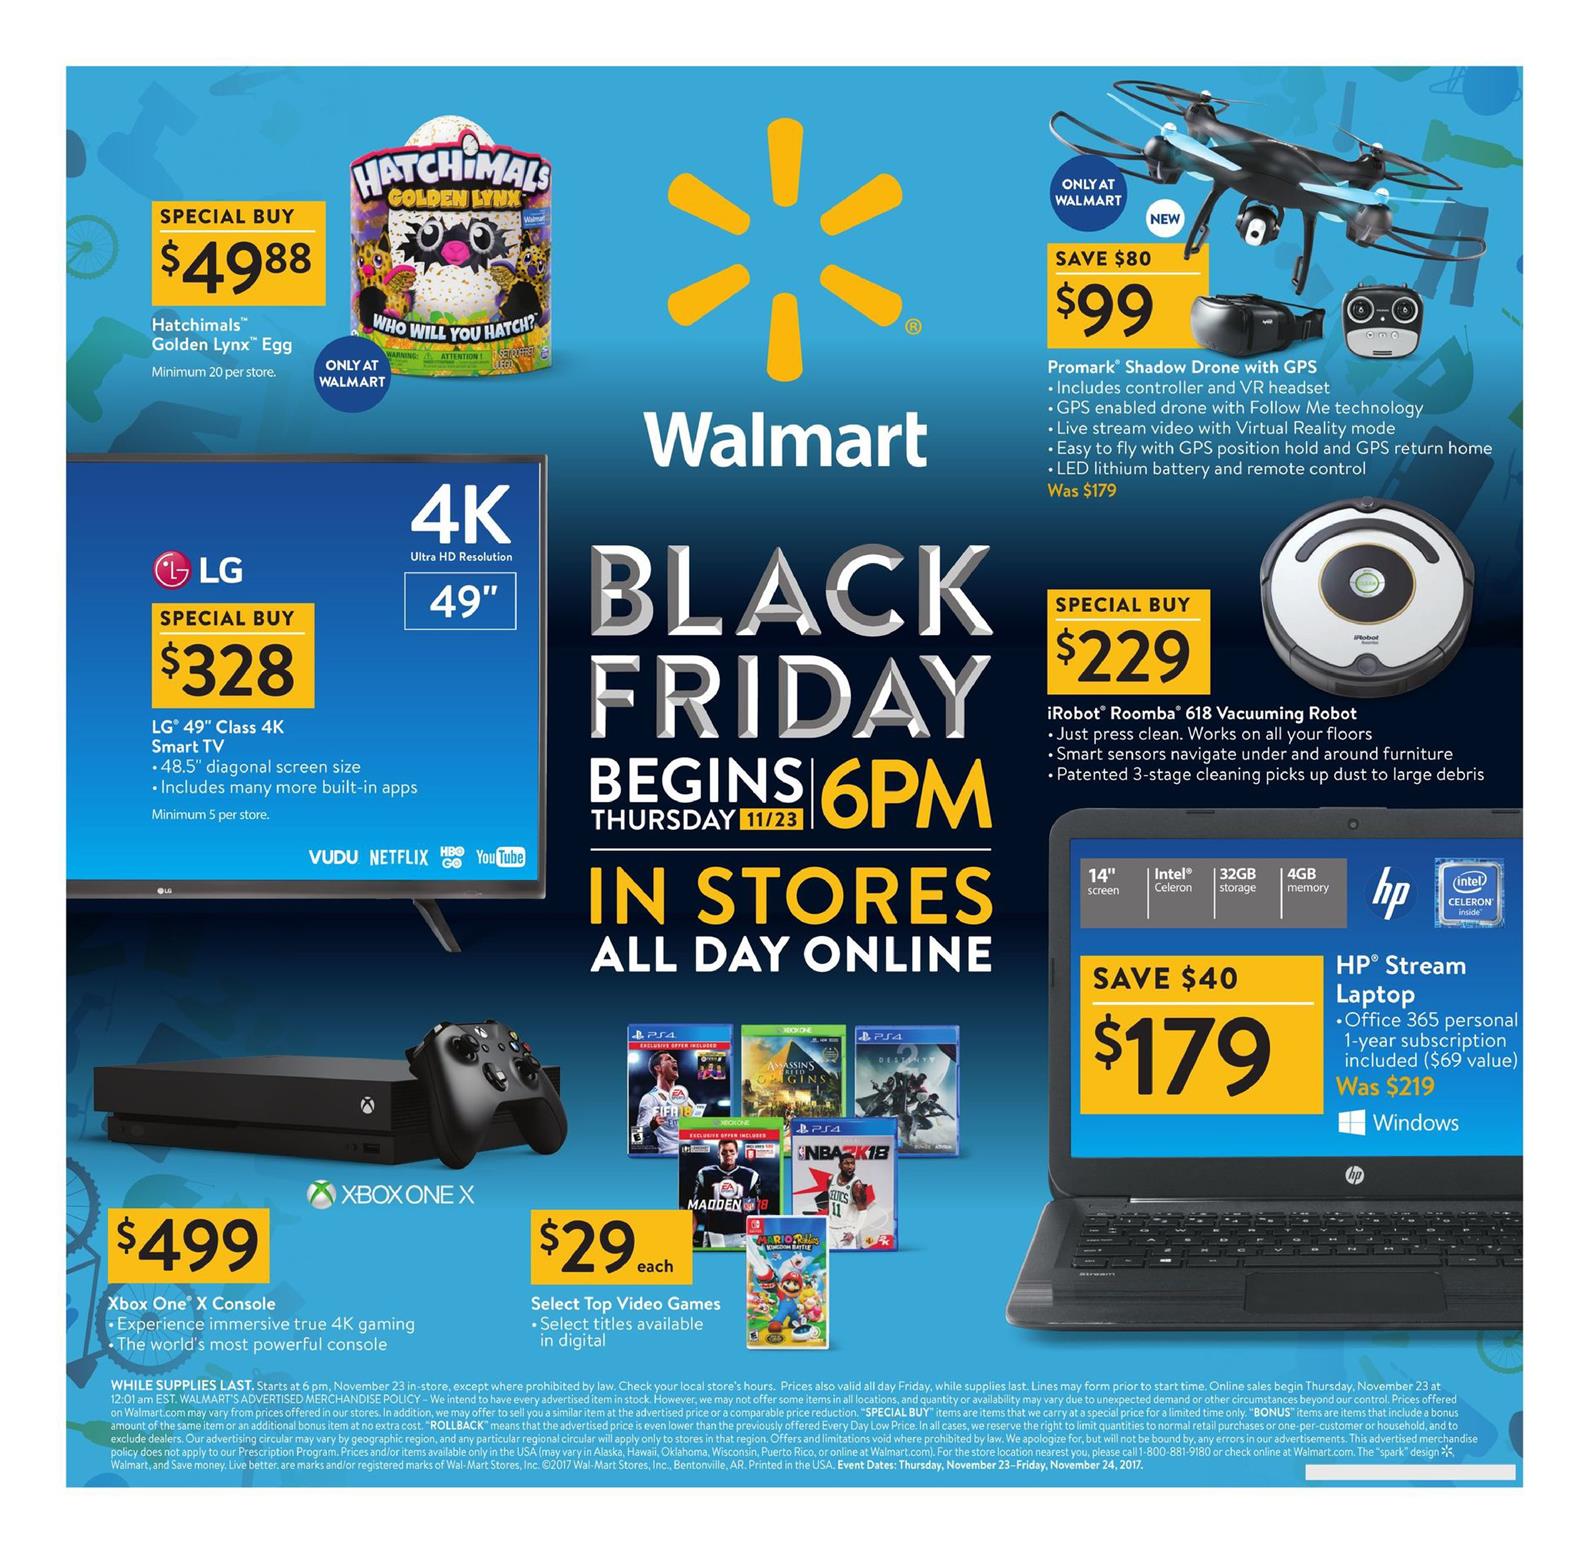 Walmart Black Friday Ad 2017 - WeeklyAds2 - What Are The Real Black Friday Deals